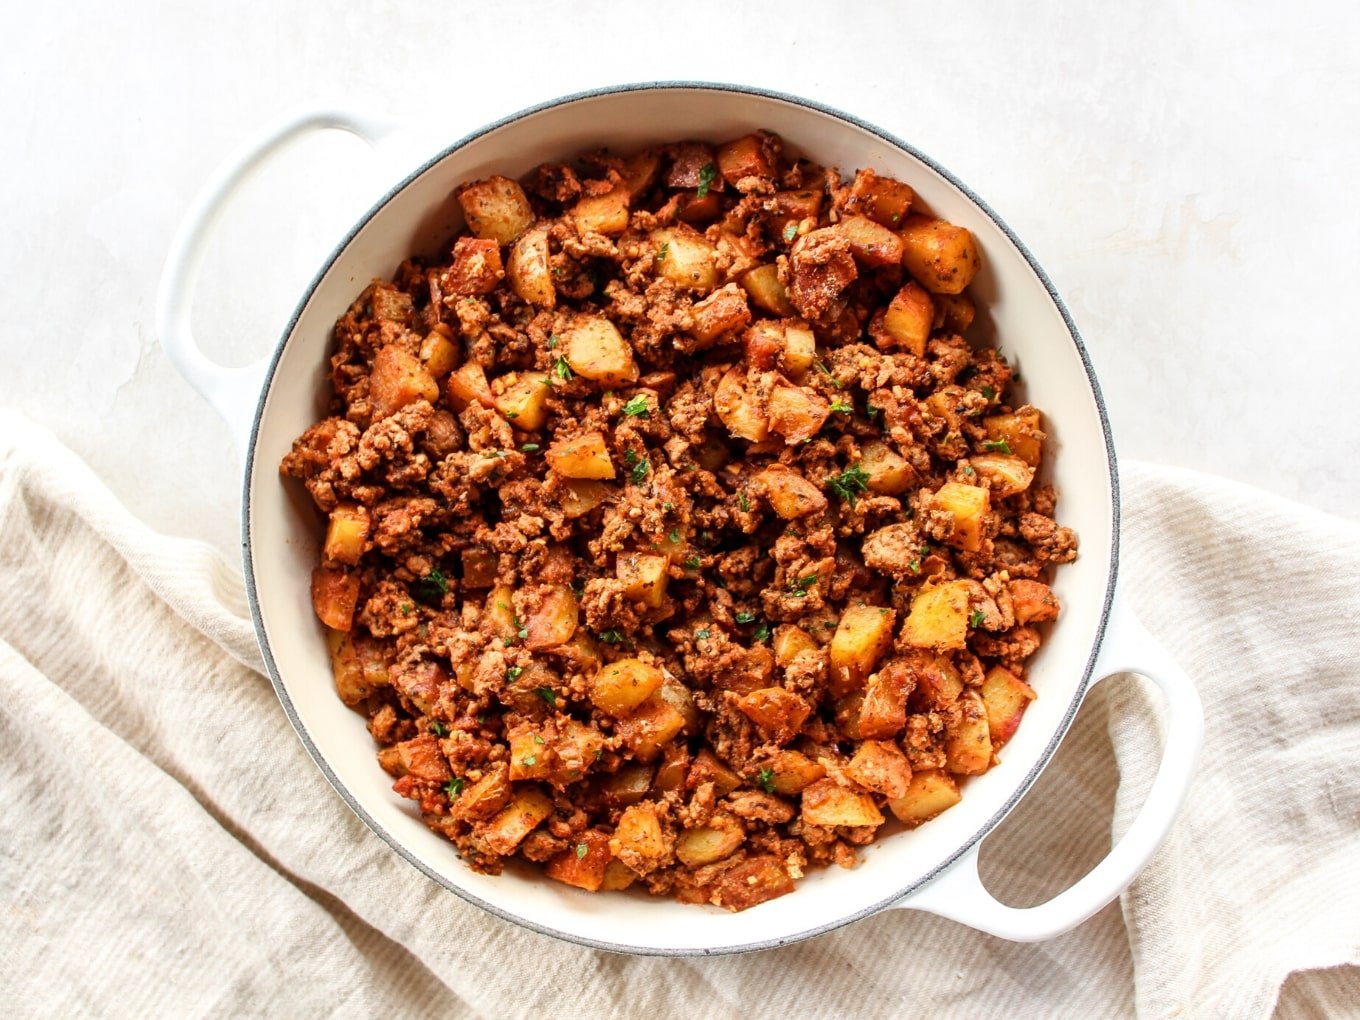 https://thewholecook.com/wp-content/uploads/2020/04/Ground-Turkey-Potato-Skillet-by-The-Whole-Cook-horizontal.jpg